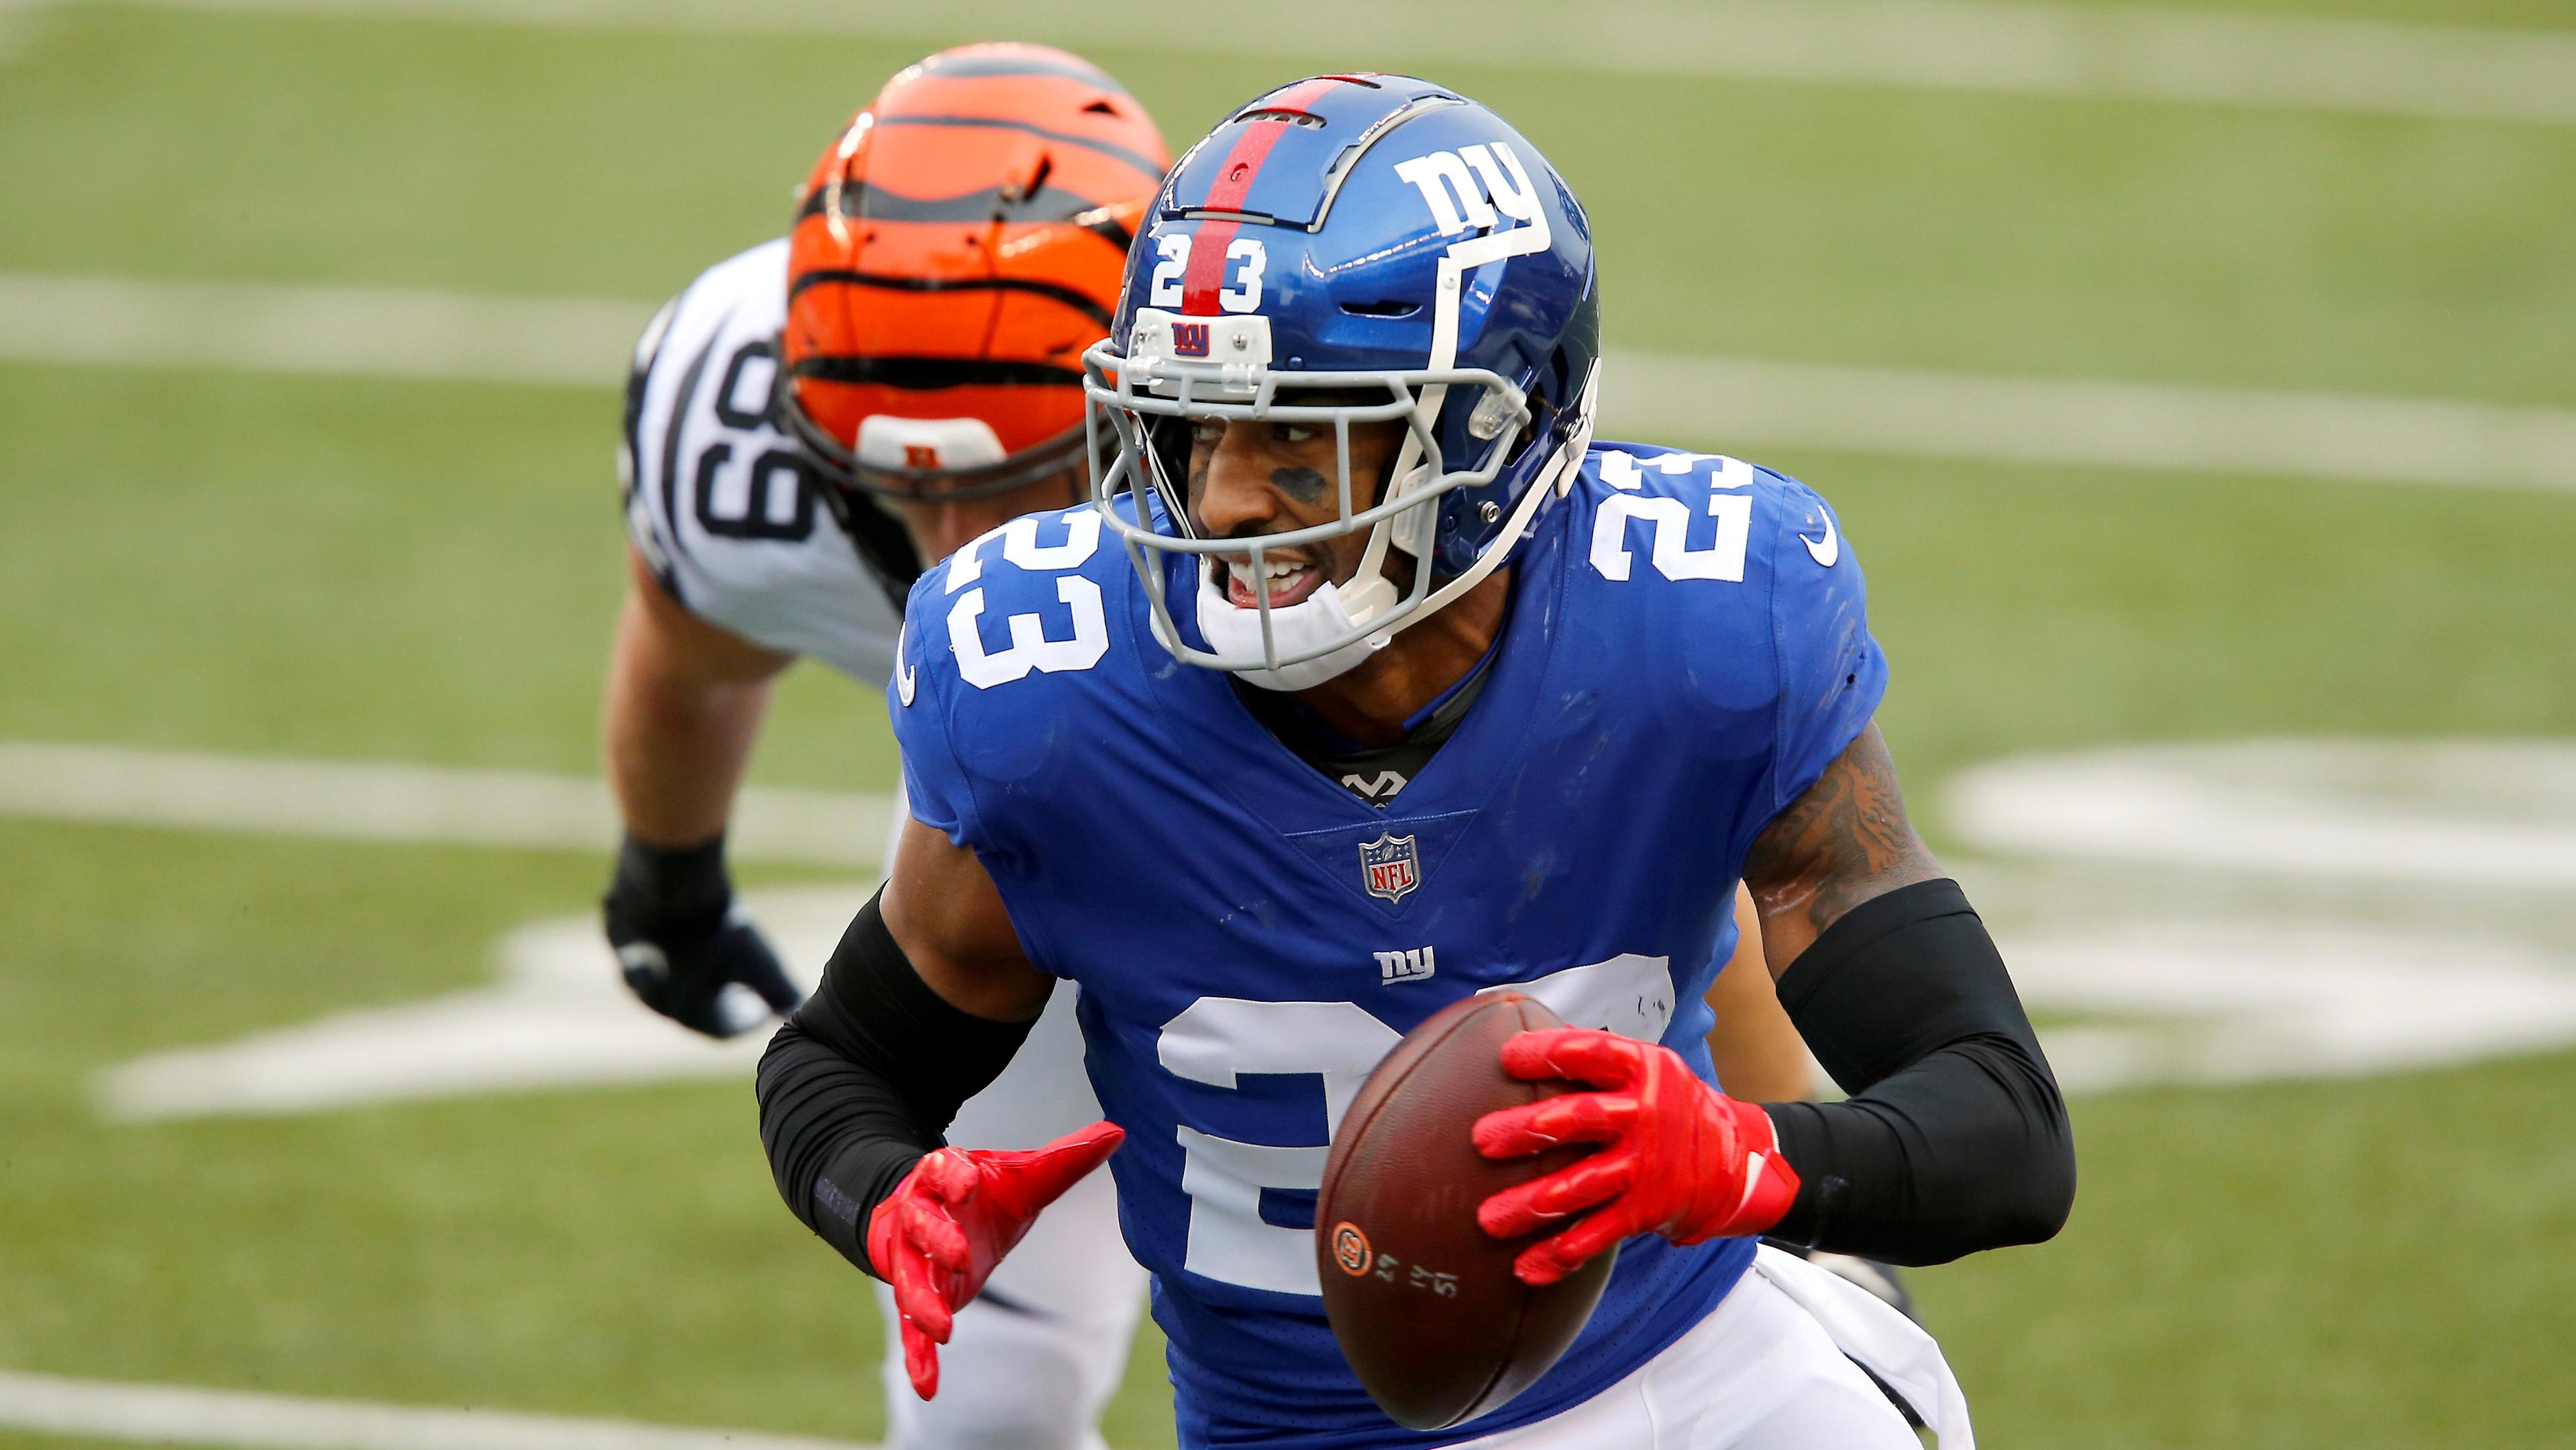 Nov 29, 2020; Cincinnati, Ohio, USA; New York Giants free safety Logan Ryan (23) runs with the ball after recovering the forced fumble during the fourth quarter against the Cincinnati Bengals at Paul Brown Stadium. Mandatory Credit: Joseph Maiorana-USA TODAY Sports / Joseph Maiorana-USA TODAY Sports